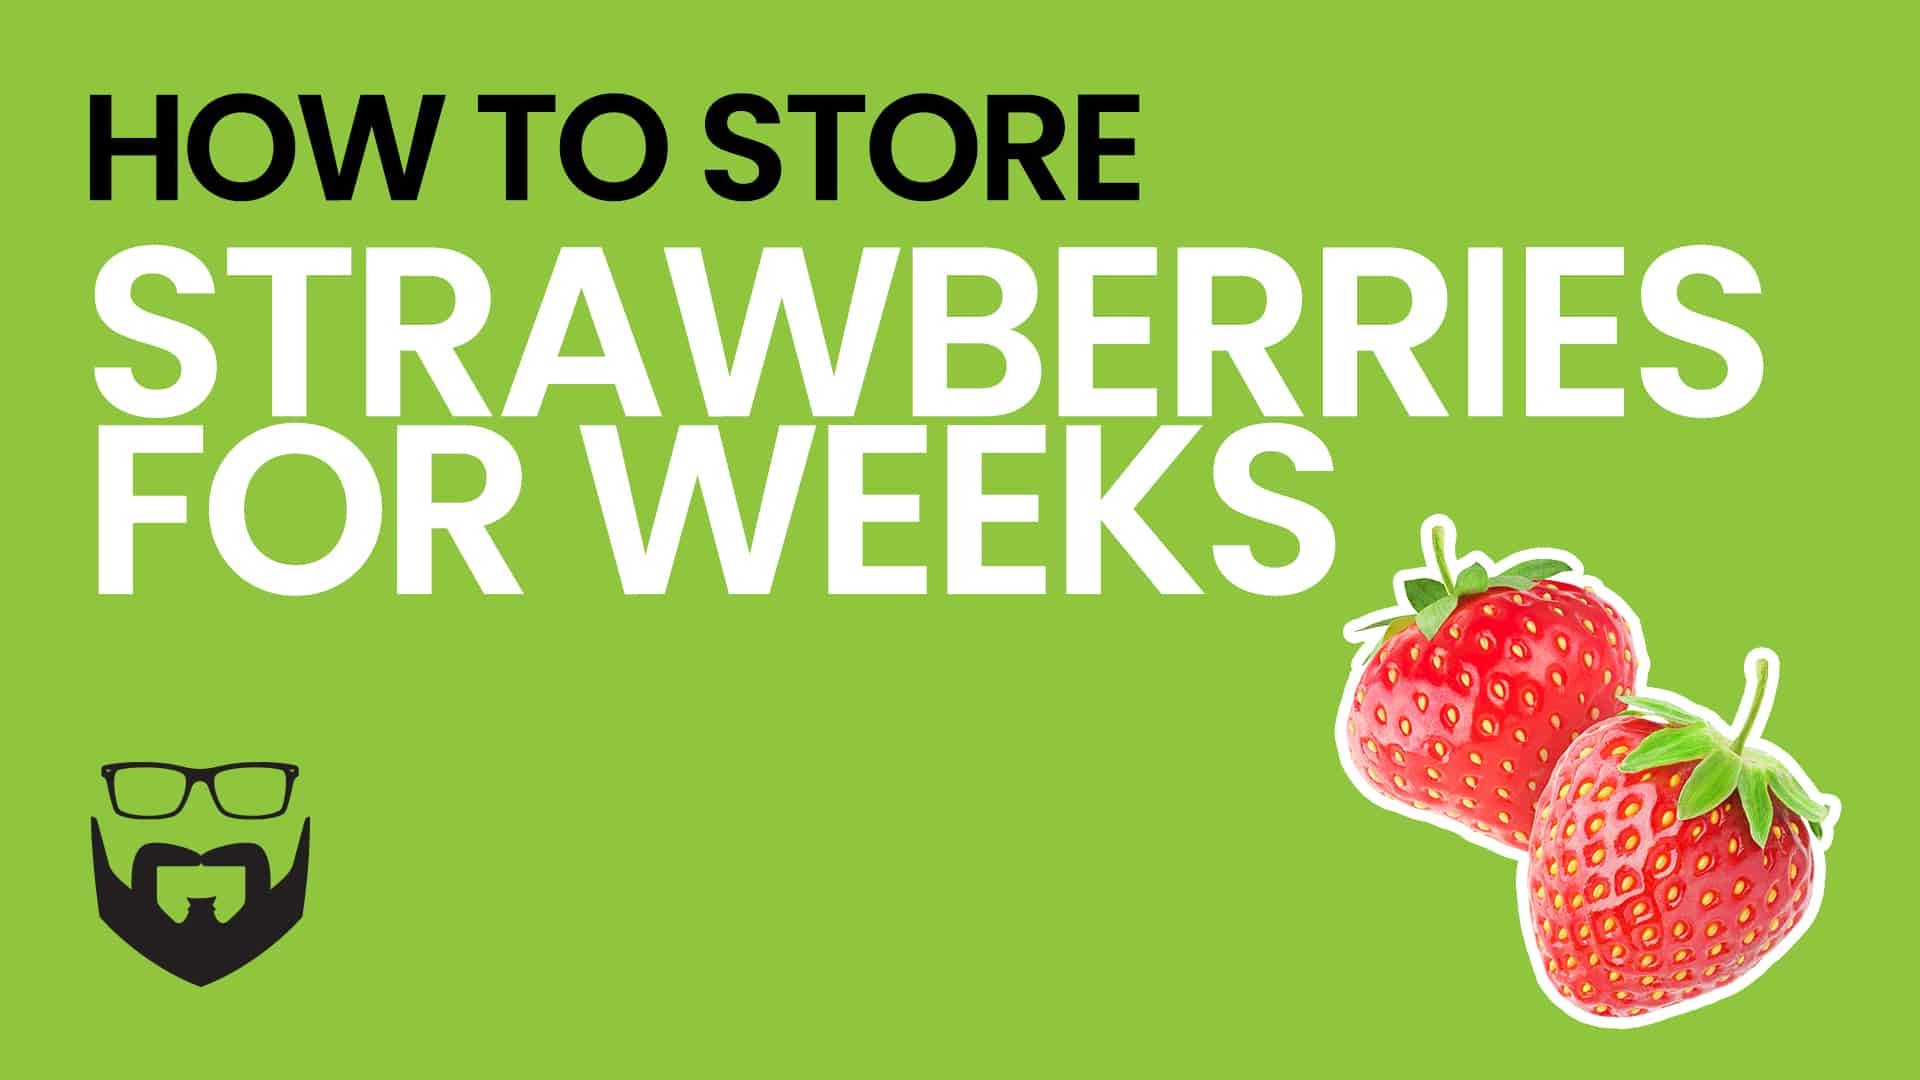 How to Store Strawberris for Weeks Video - Green